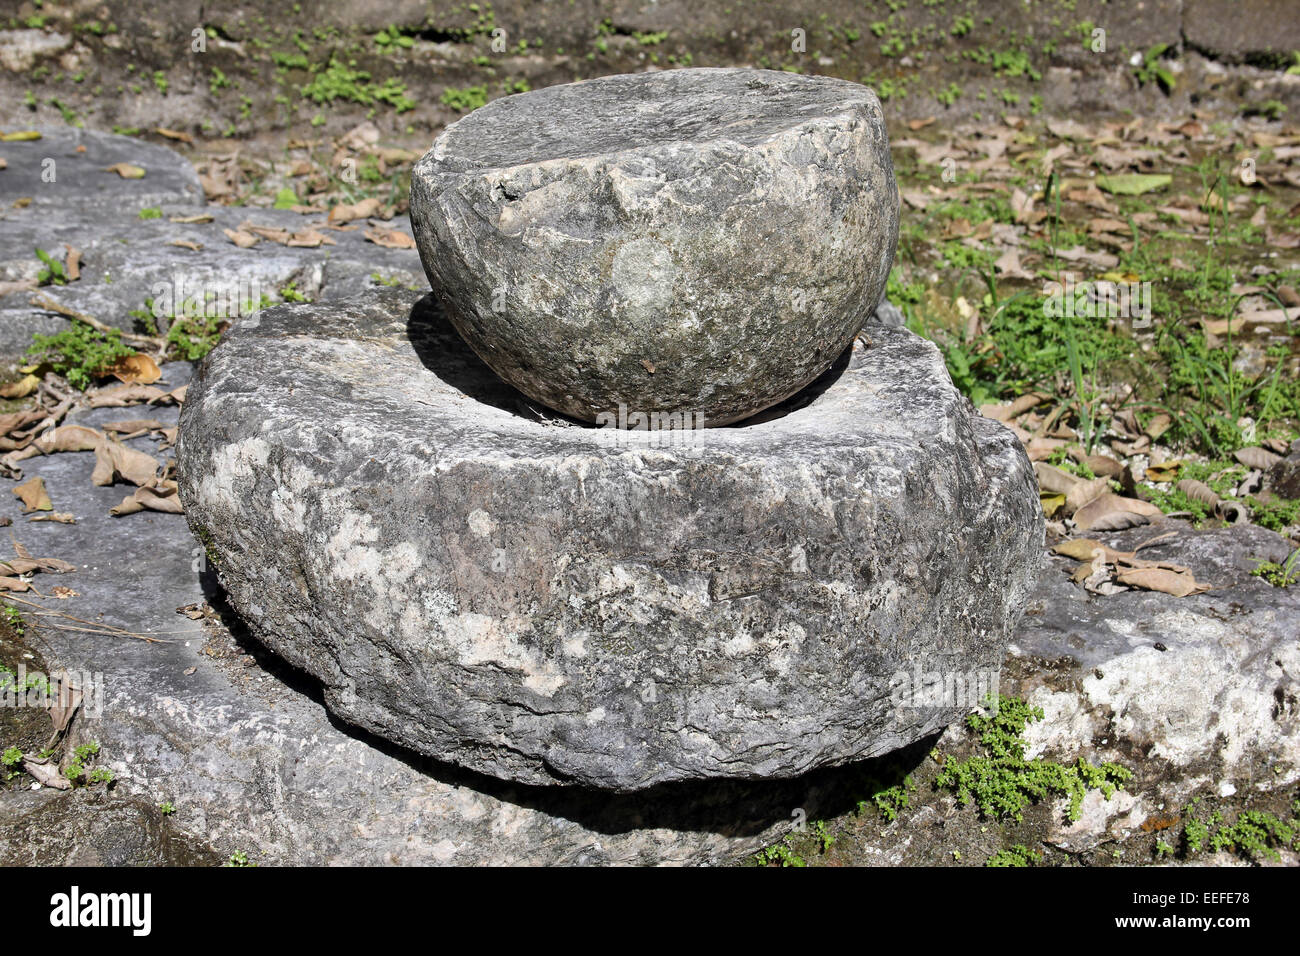 Grinding Stone At The Mayan Archaeological Site Of Lamanai, Belize Stock Photo